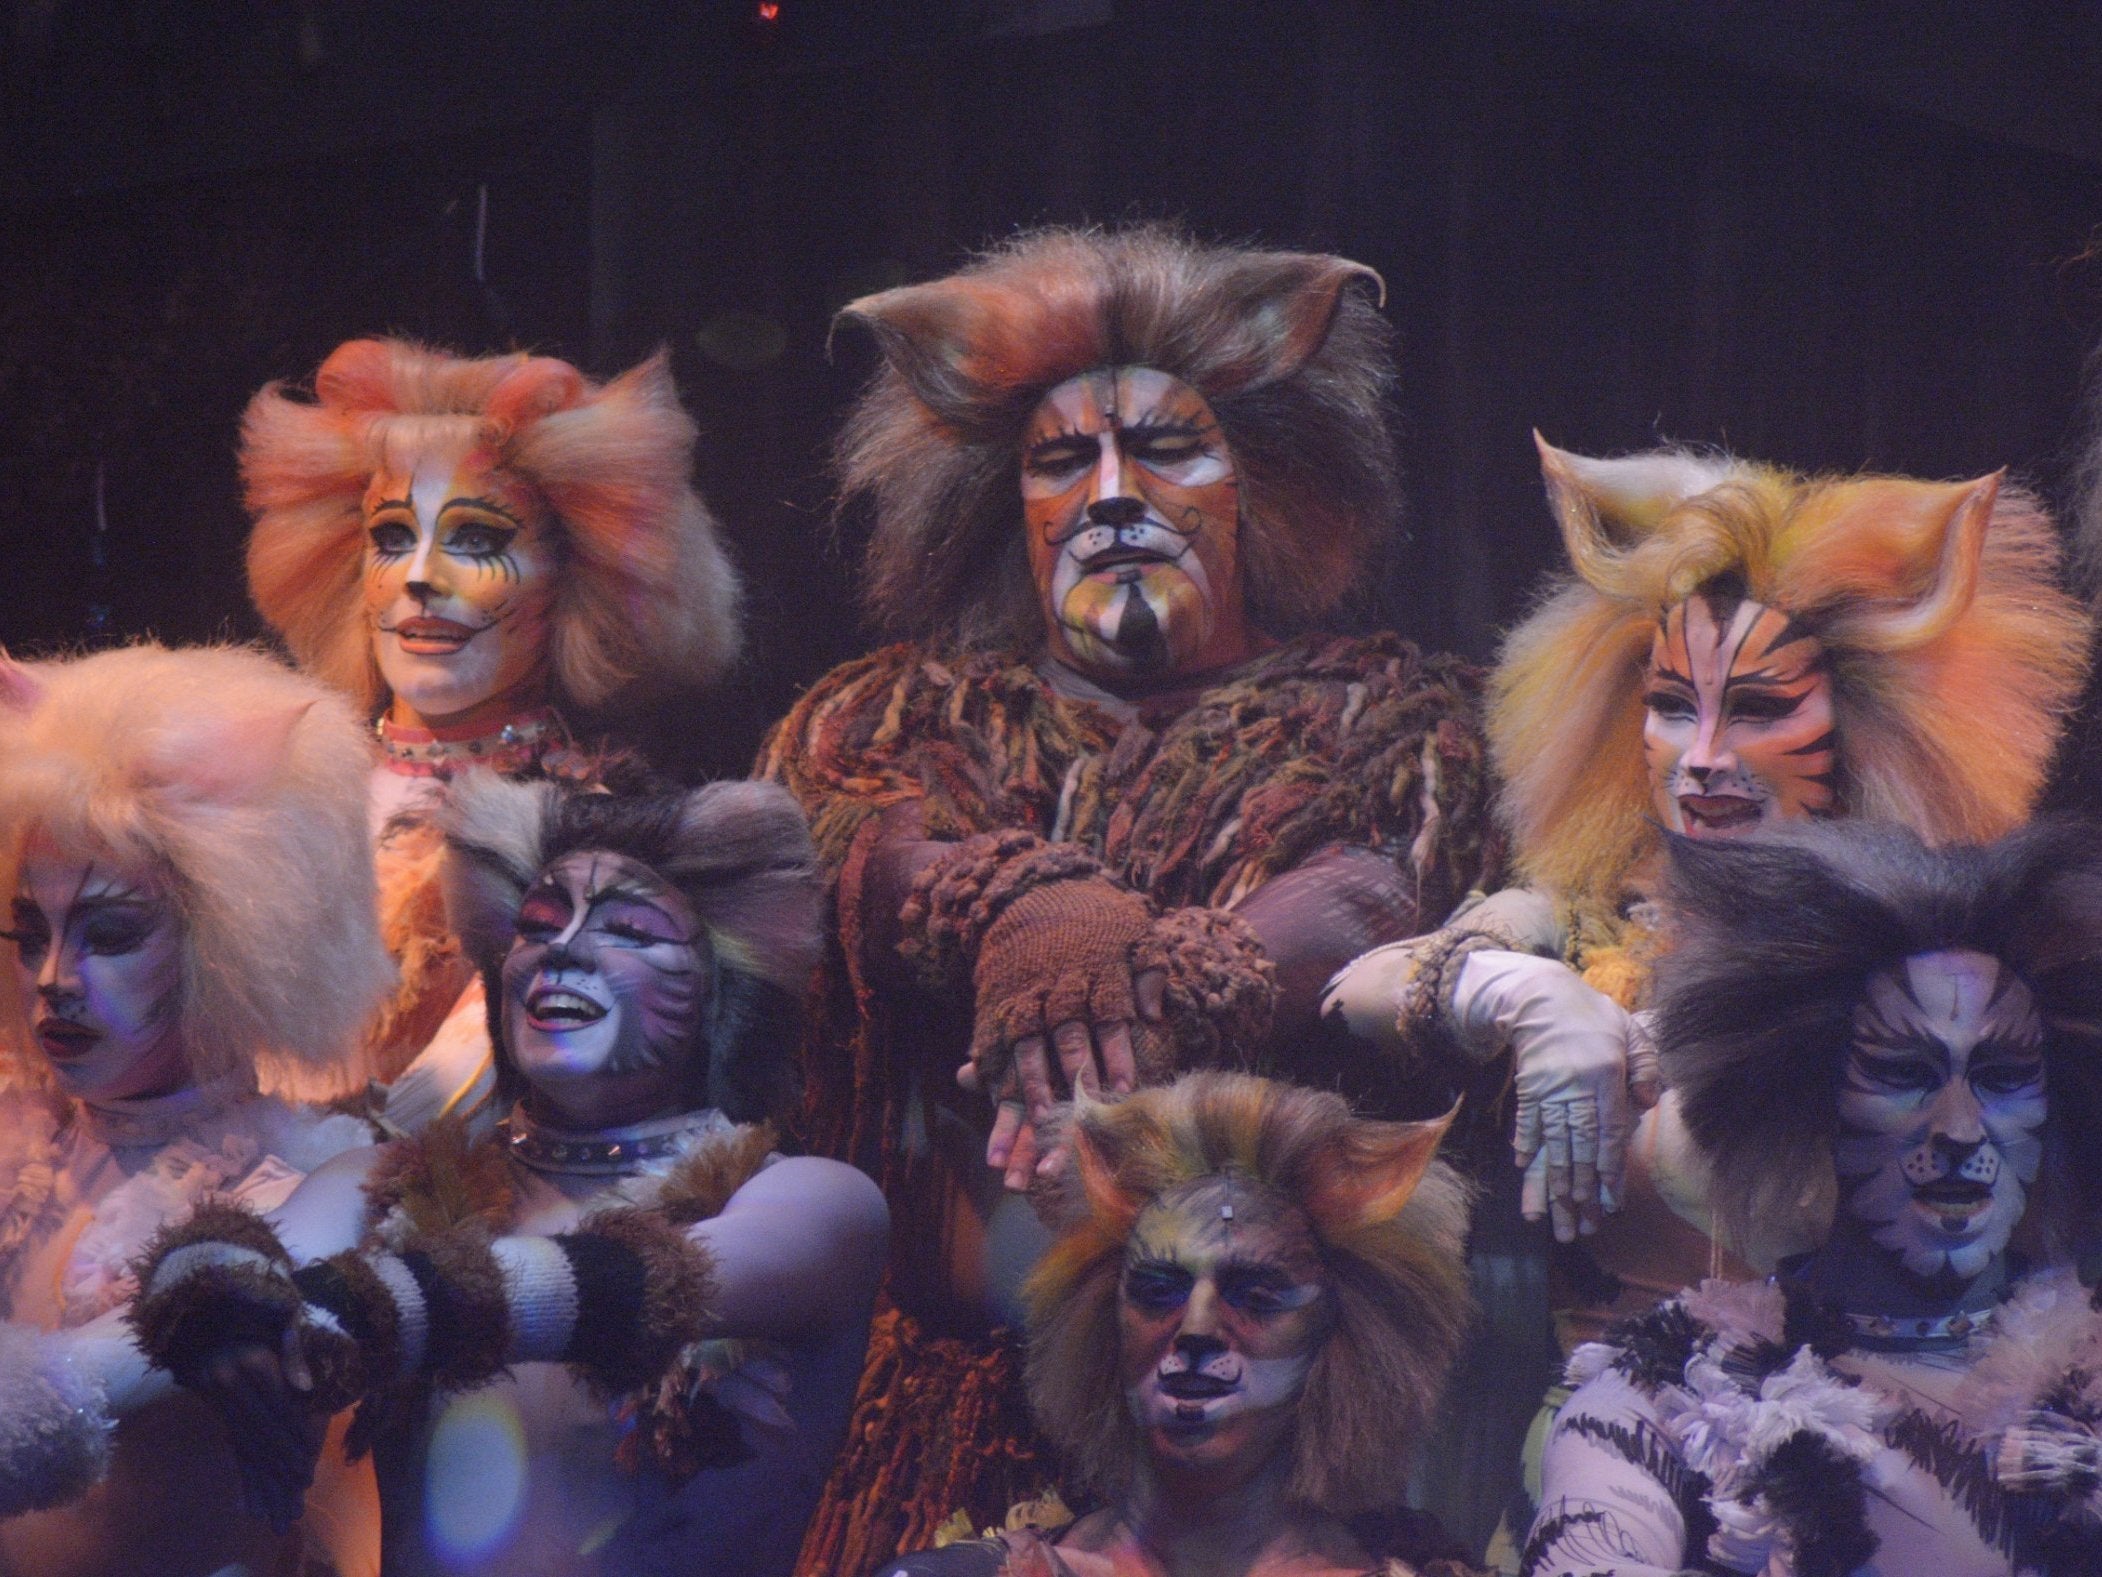 The Cats in the 'Cats' Movie Will Be the Size of Actual Cats